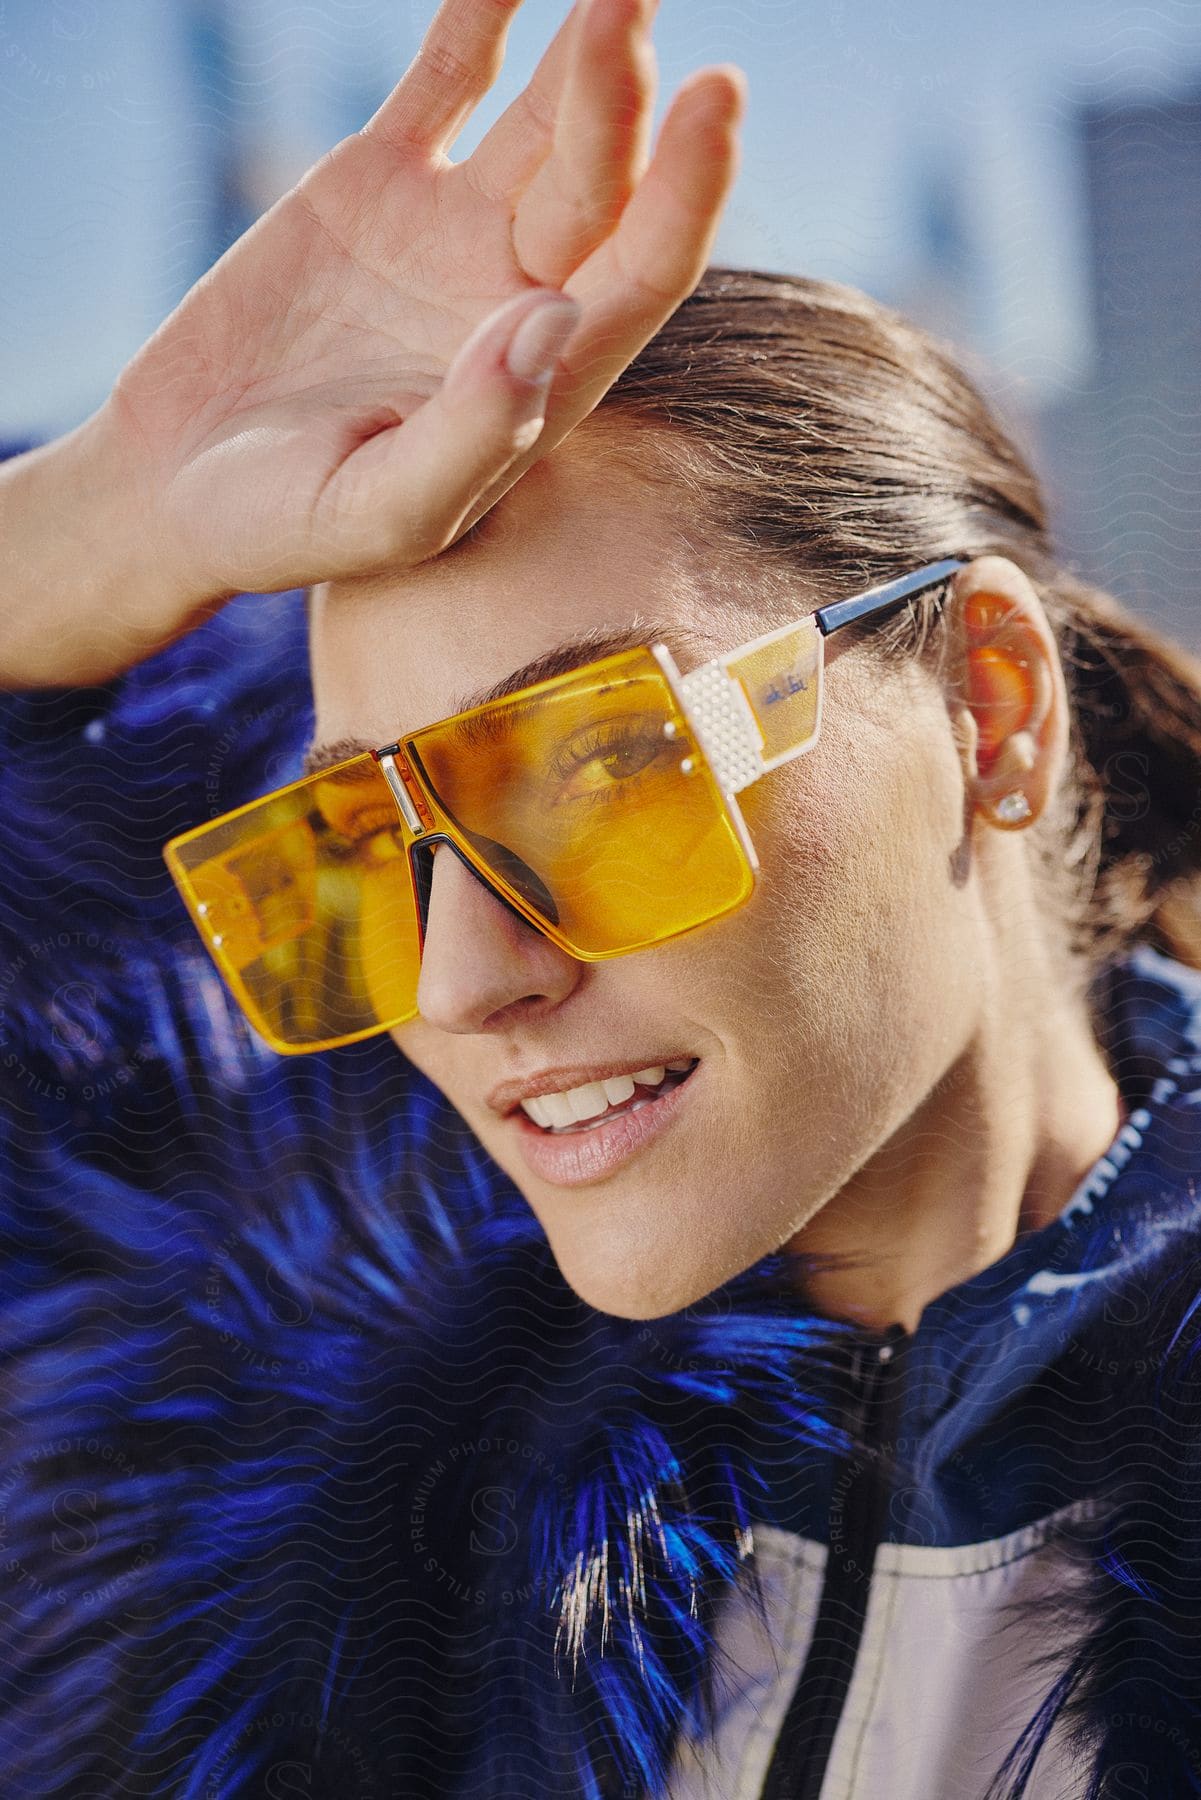 A young woman wearing protective glasses and a blue jacket smiles as she holds her hand over her forehead